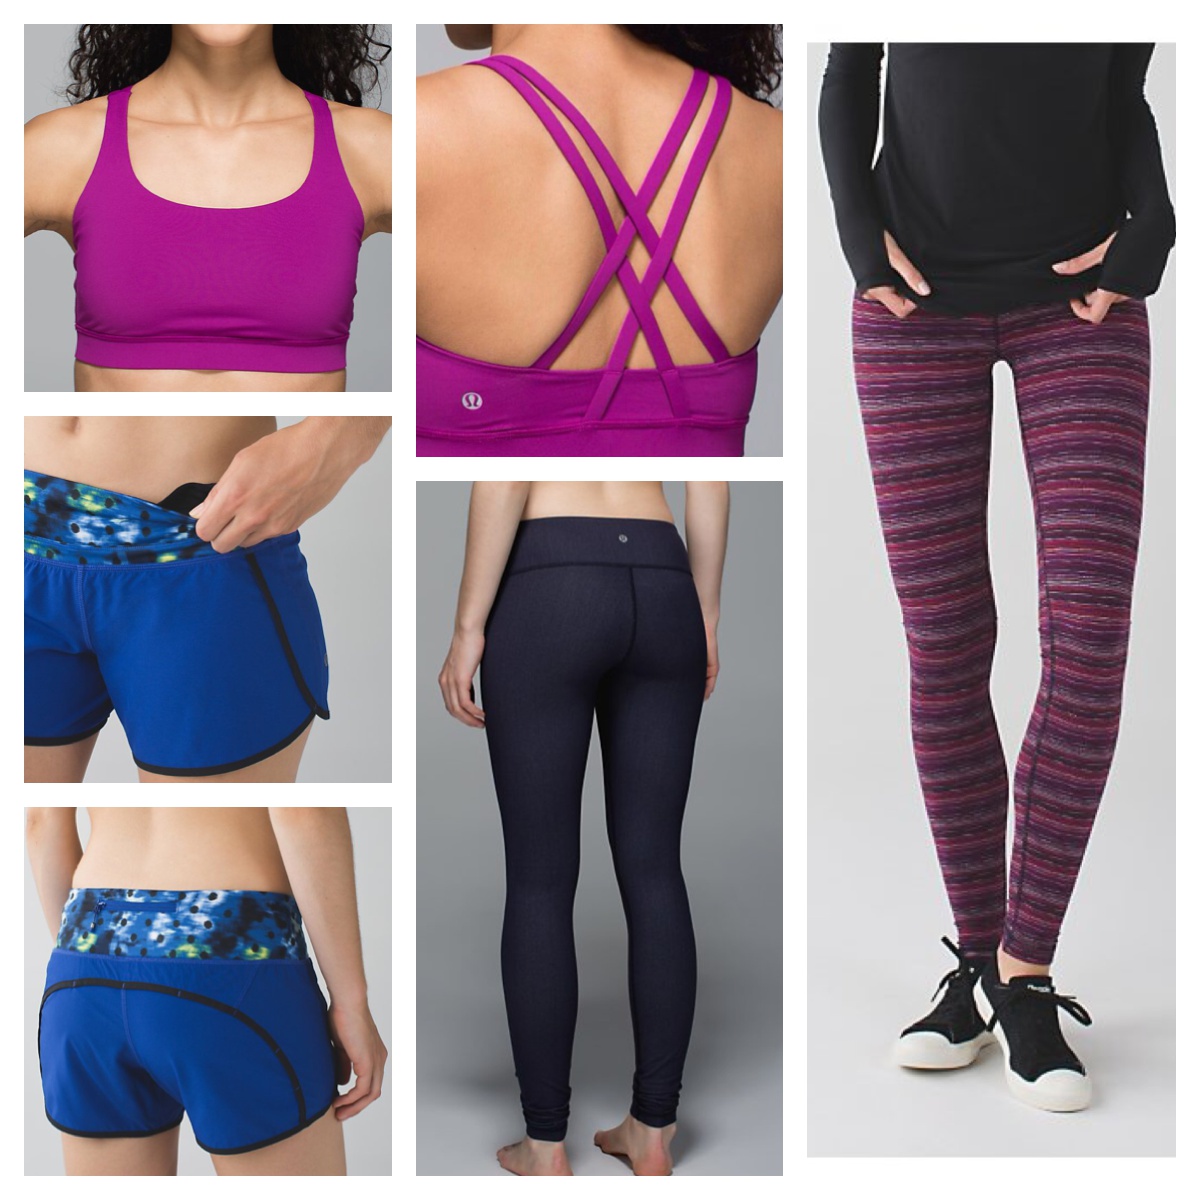 The lululemon Wundermost Collection Is Out Now - PureWow